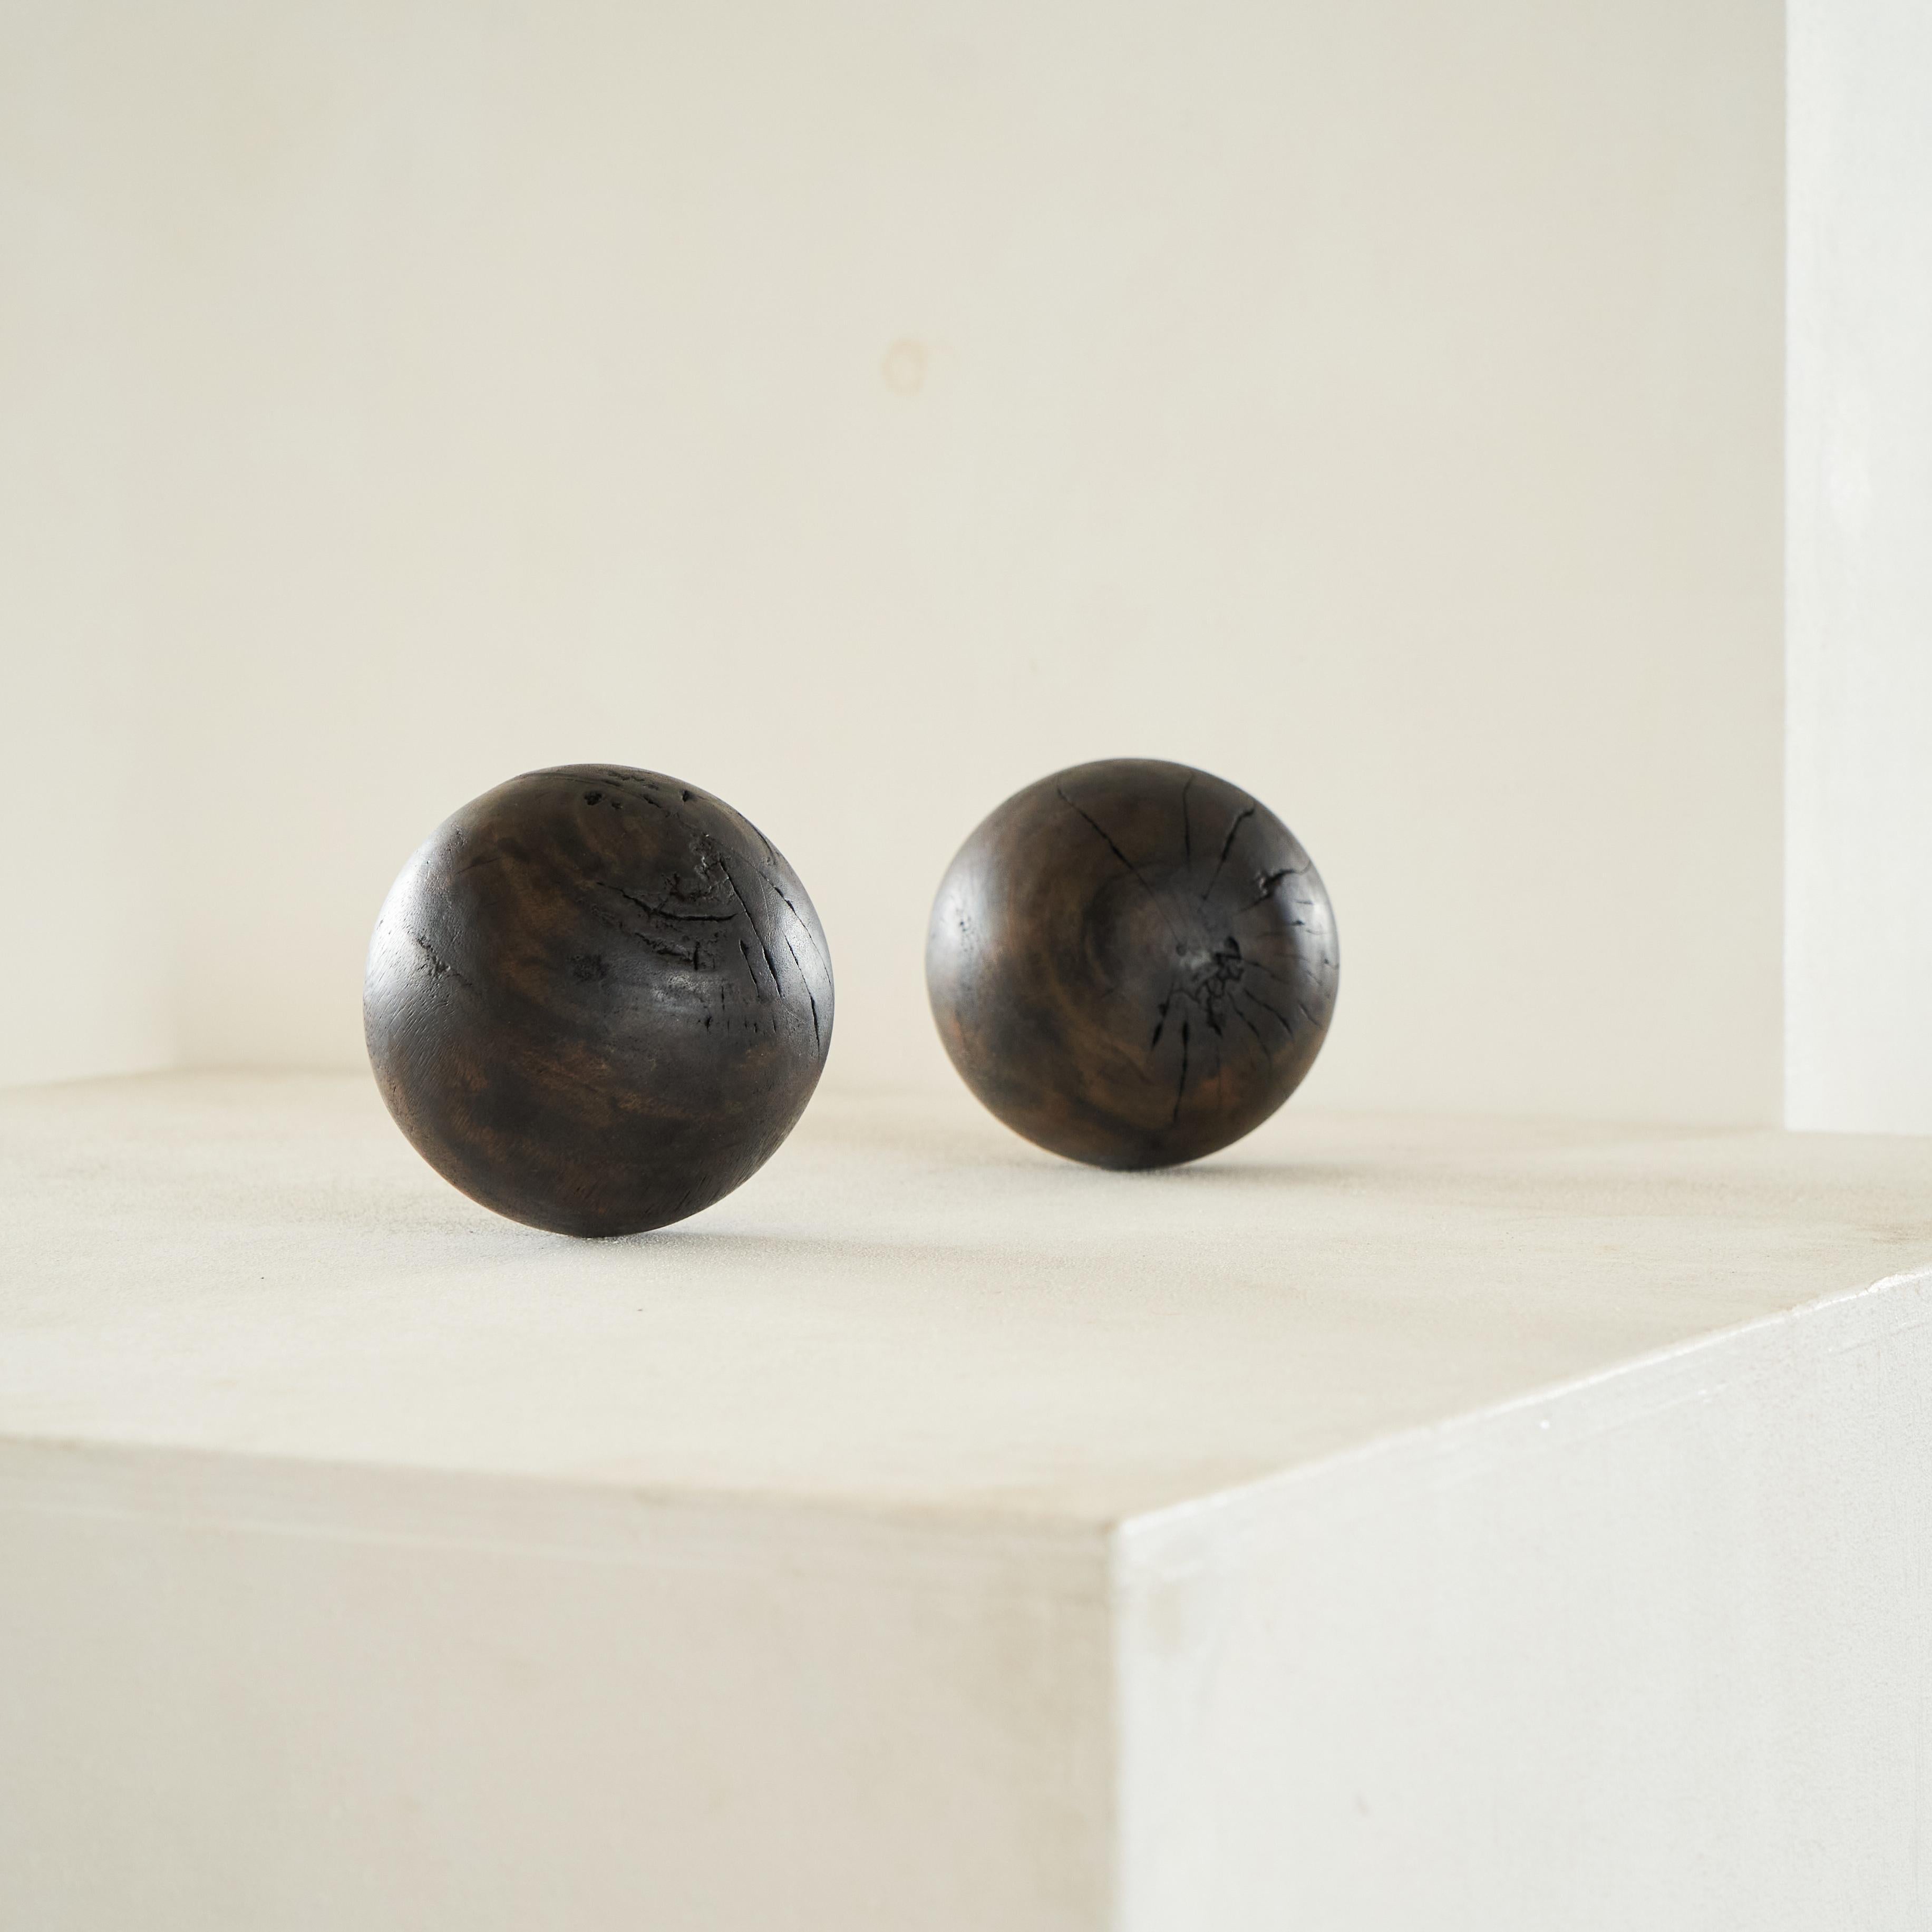 Pair of Antique Wabi Sabi Decorative Balls in Wood.

Wonderful pair of very decorative antique wooden balls. Hand made and with a true wabi sabi appearance, this pair would be perfect on a table or sideboard as decoration. Great hand made feel and